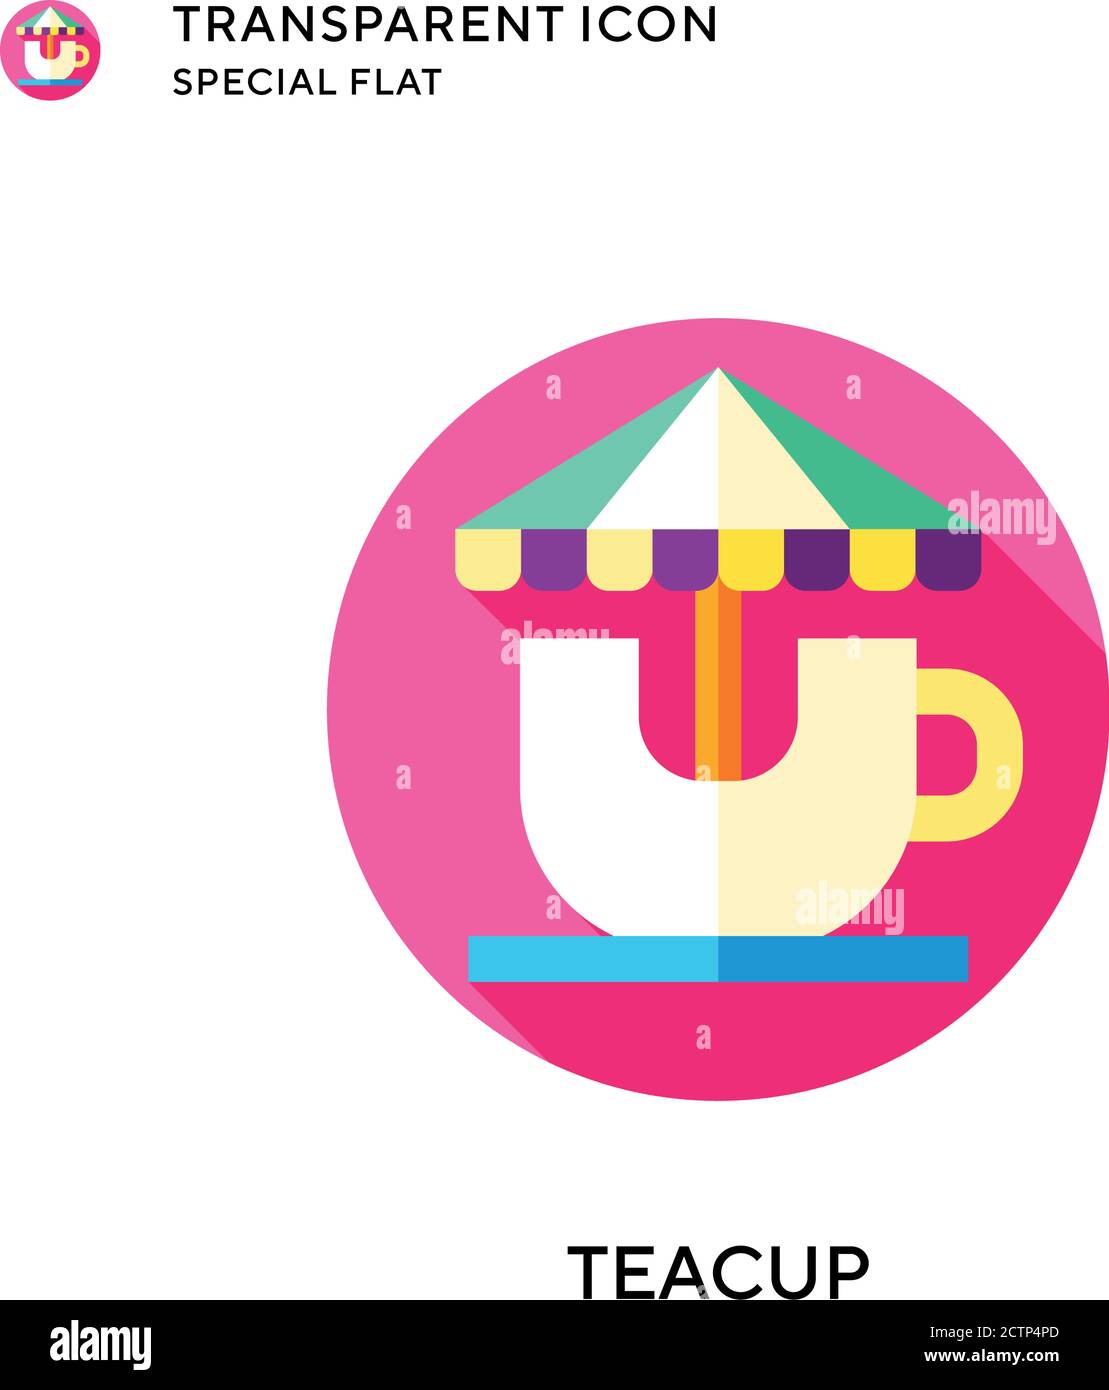 Teacup vector icon. Flat style illustration. EPS 10 vector. Stock Vector